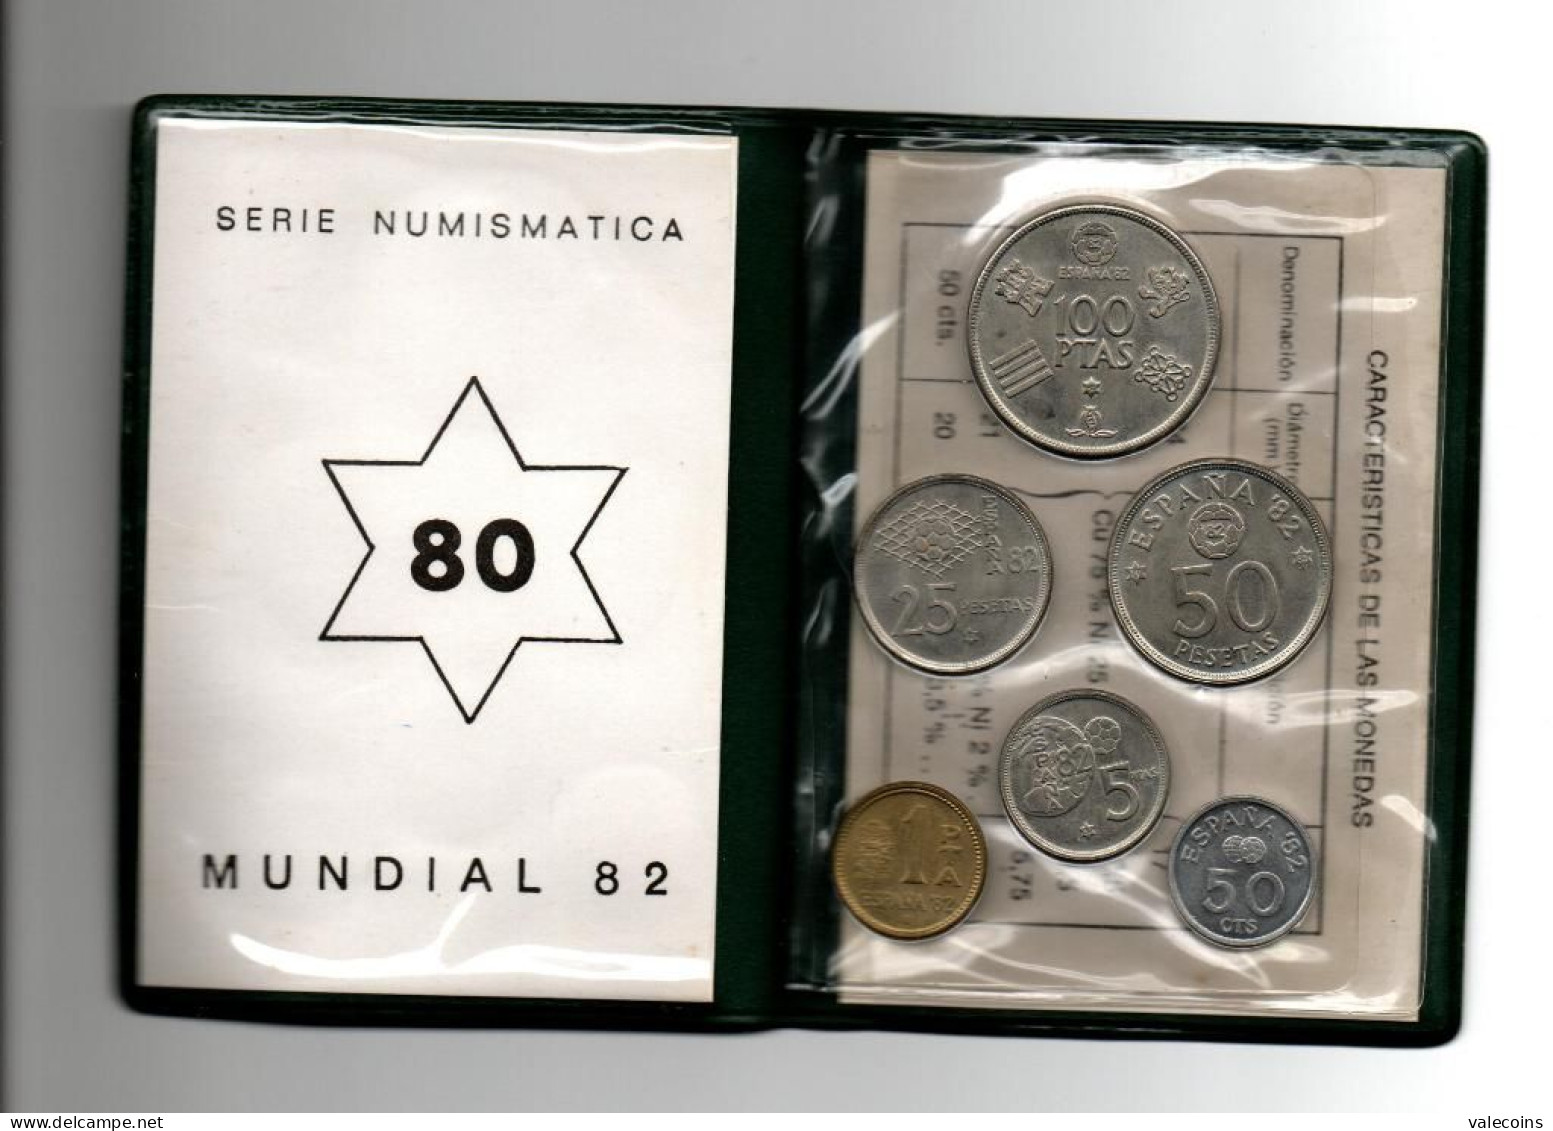 Spagna España Spain - 1982 - 6 COINS - Football Soccer Mundial Mondiale - KMS OFFICIAL ISSUE - LIMITED ISSUE - Mint Sets & Proof Sets